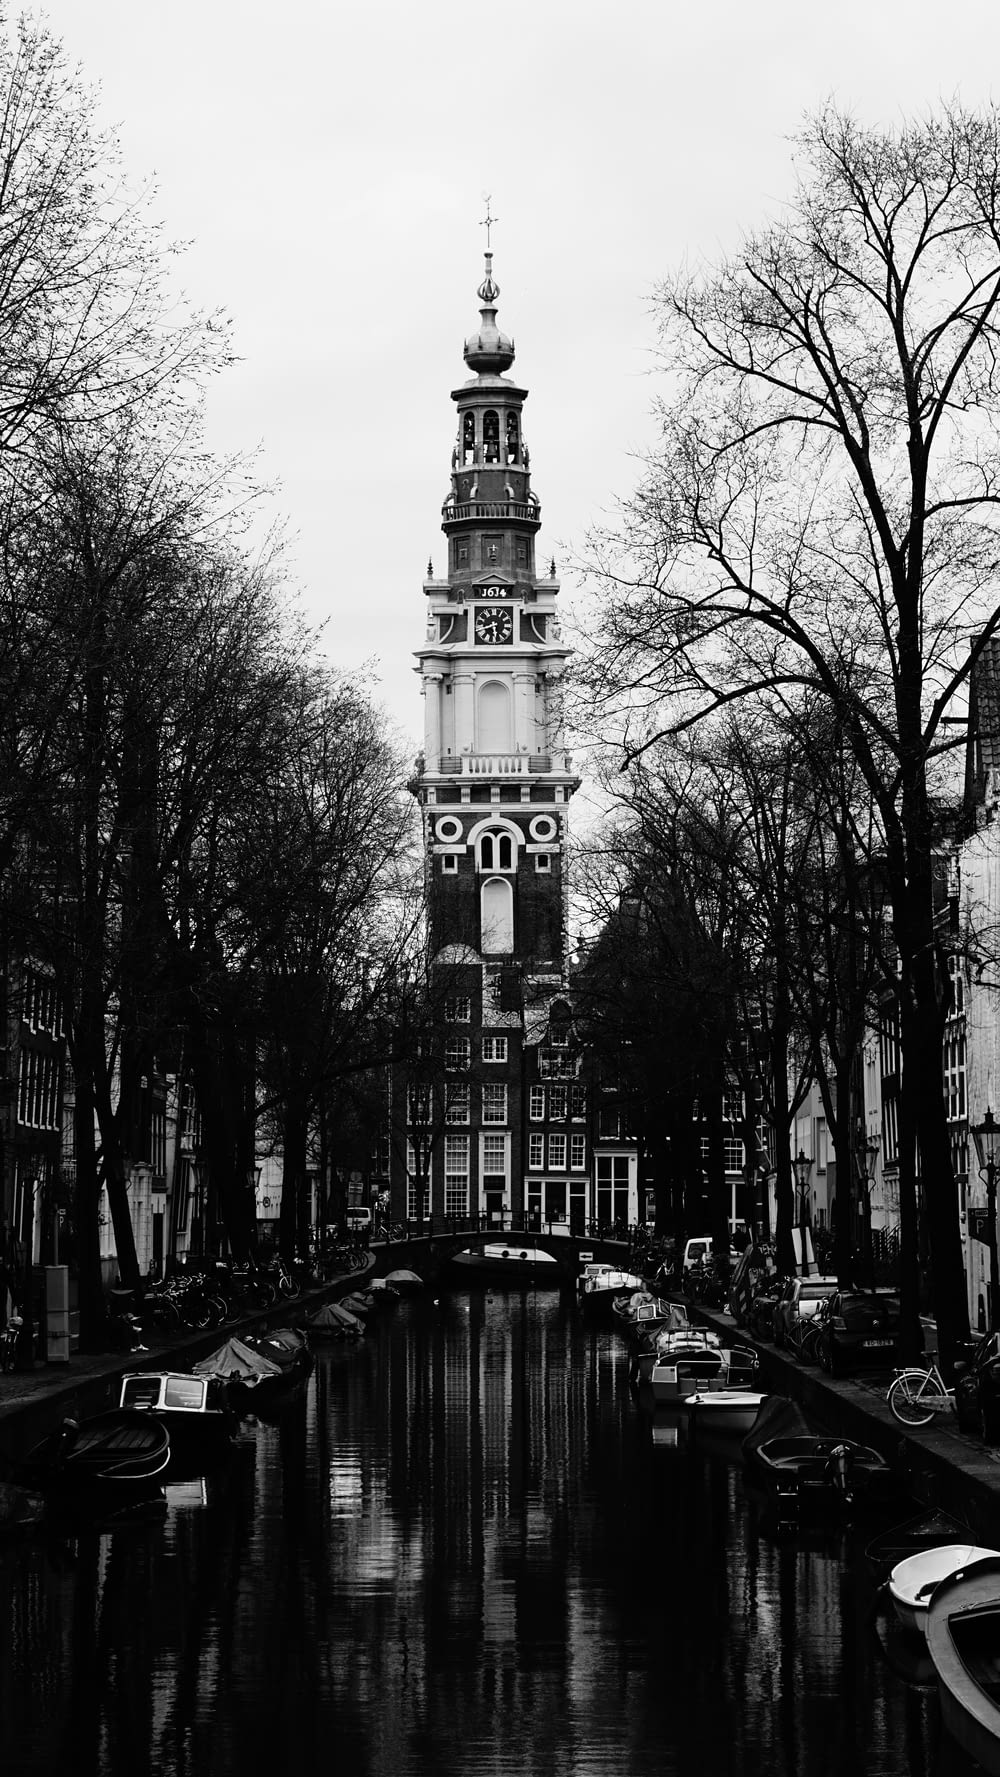 a black and white photo of a canal with a clock tower in the background